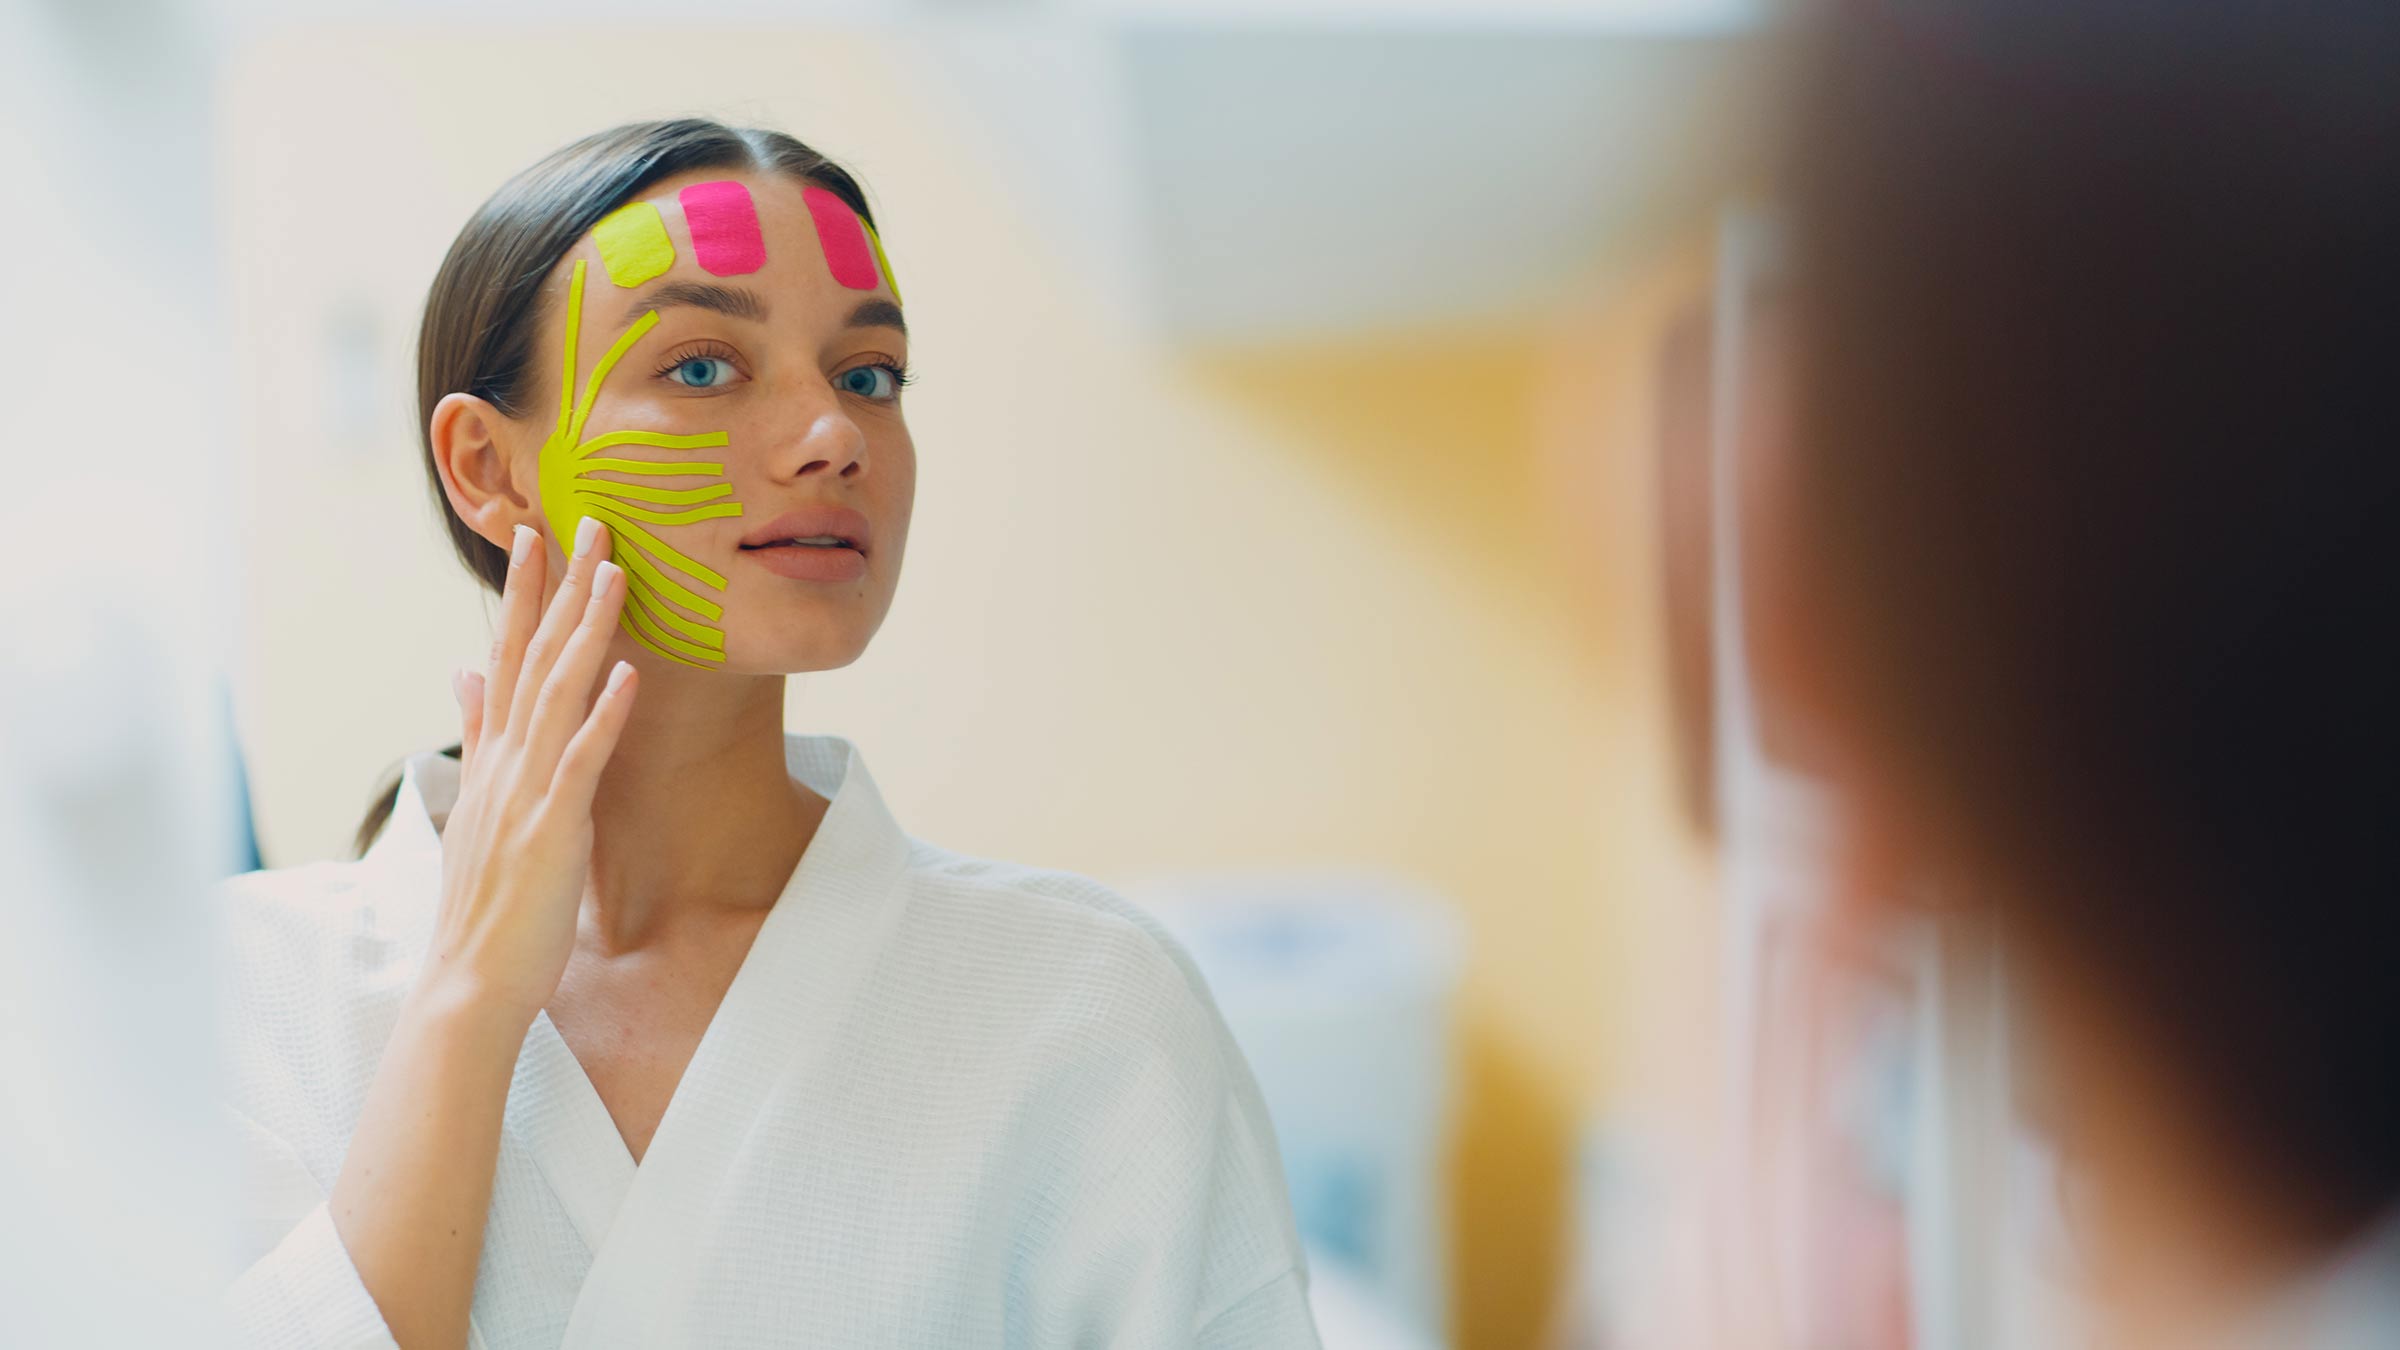 Does face taping work for preventing or eliminating wrinkles?